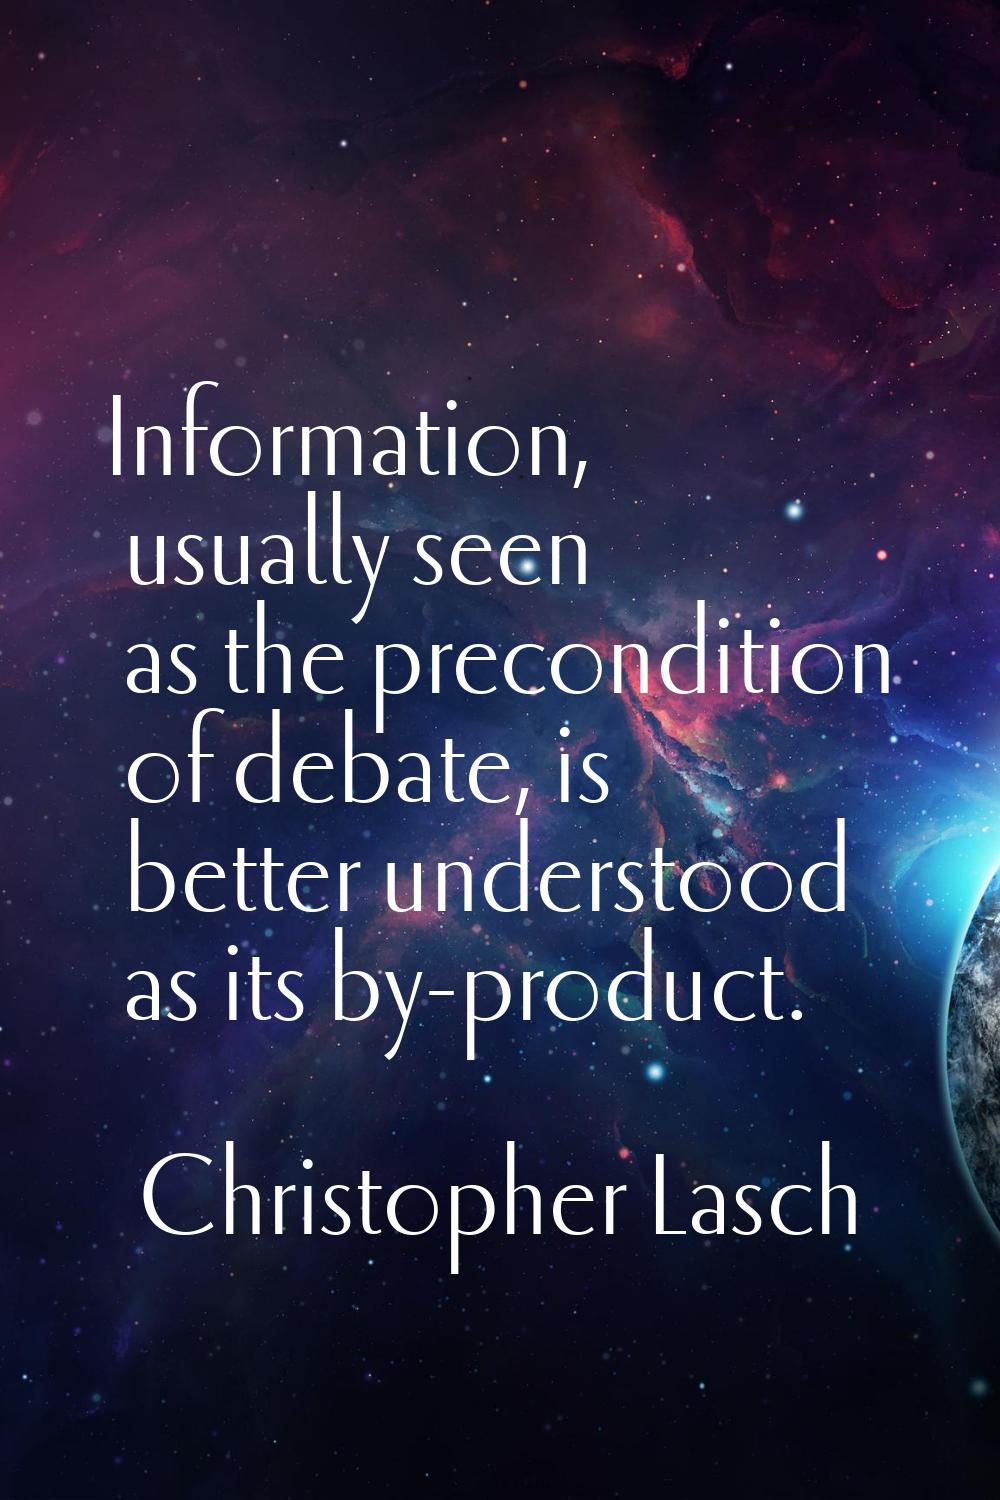 Information, usually seen as the precondition of debate, is better understood as its by-product.